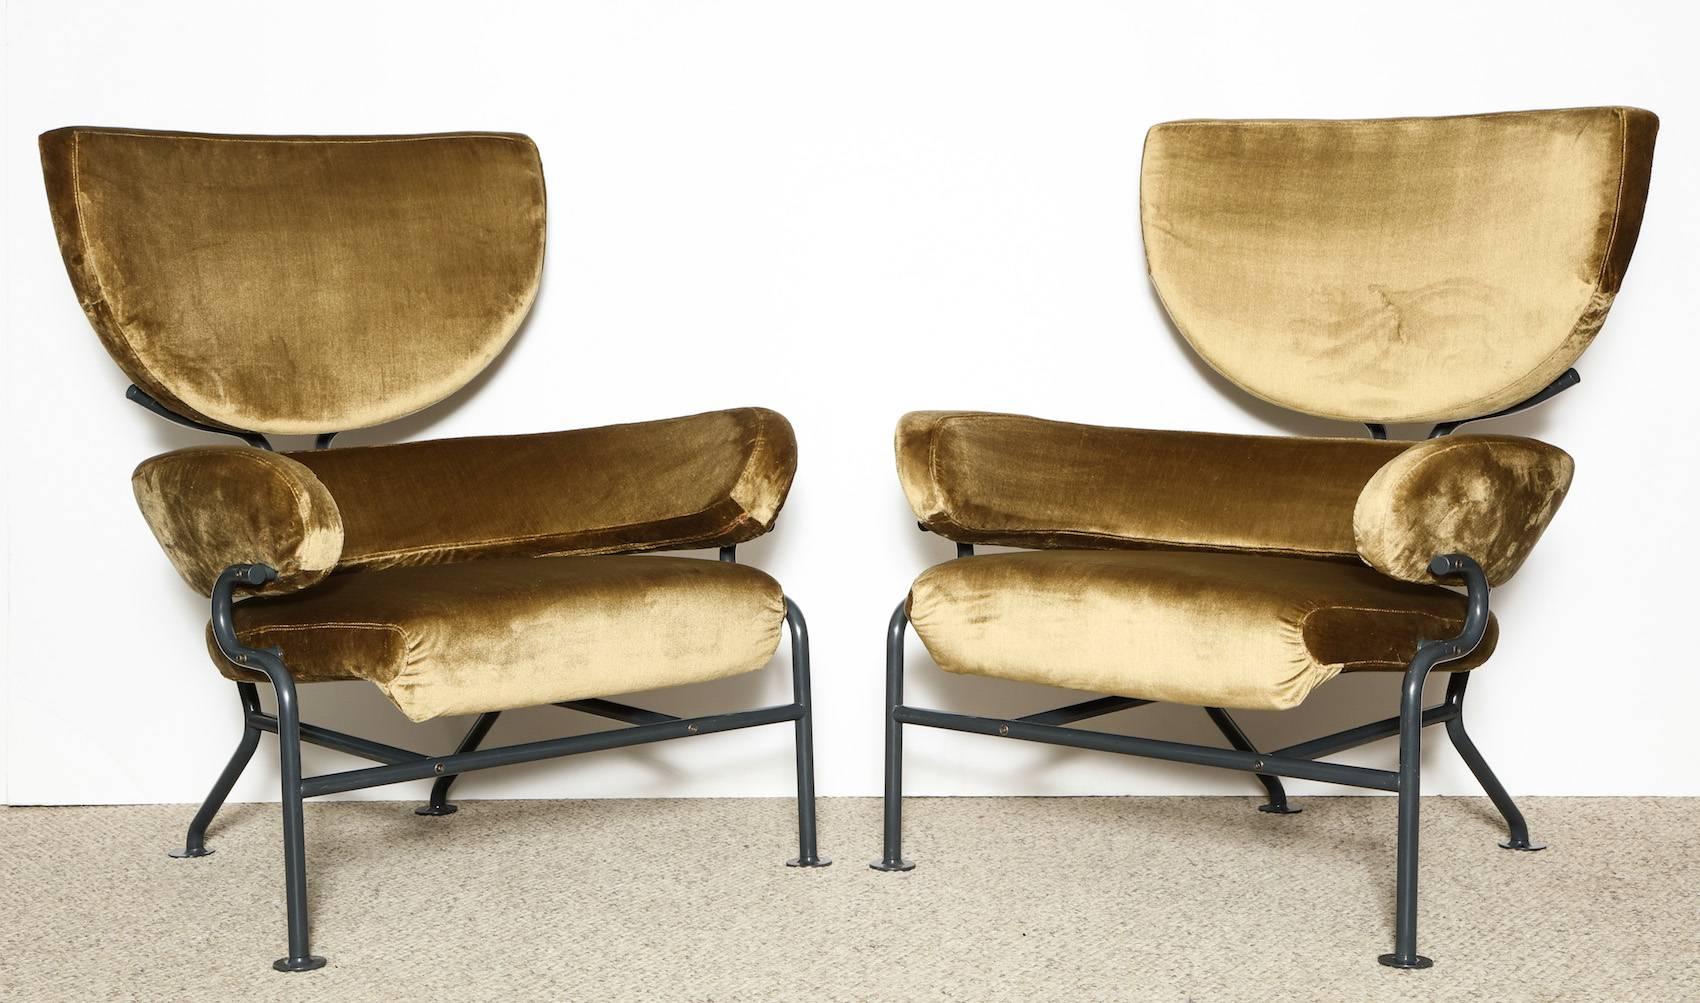 Italian Lounge Chairs by Franco Albini and Franca Helg